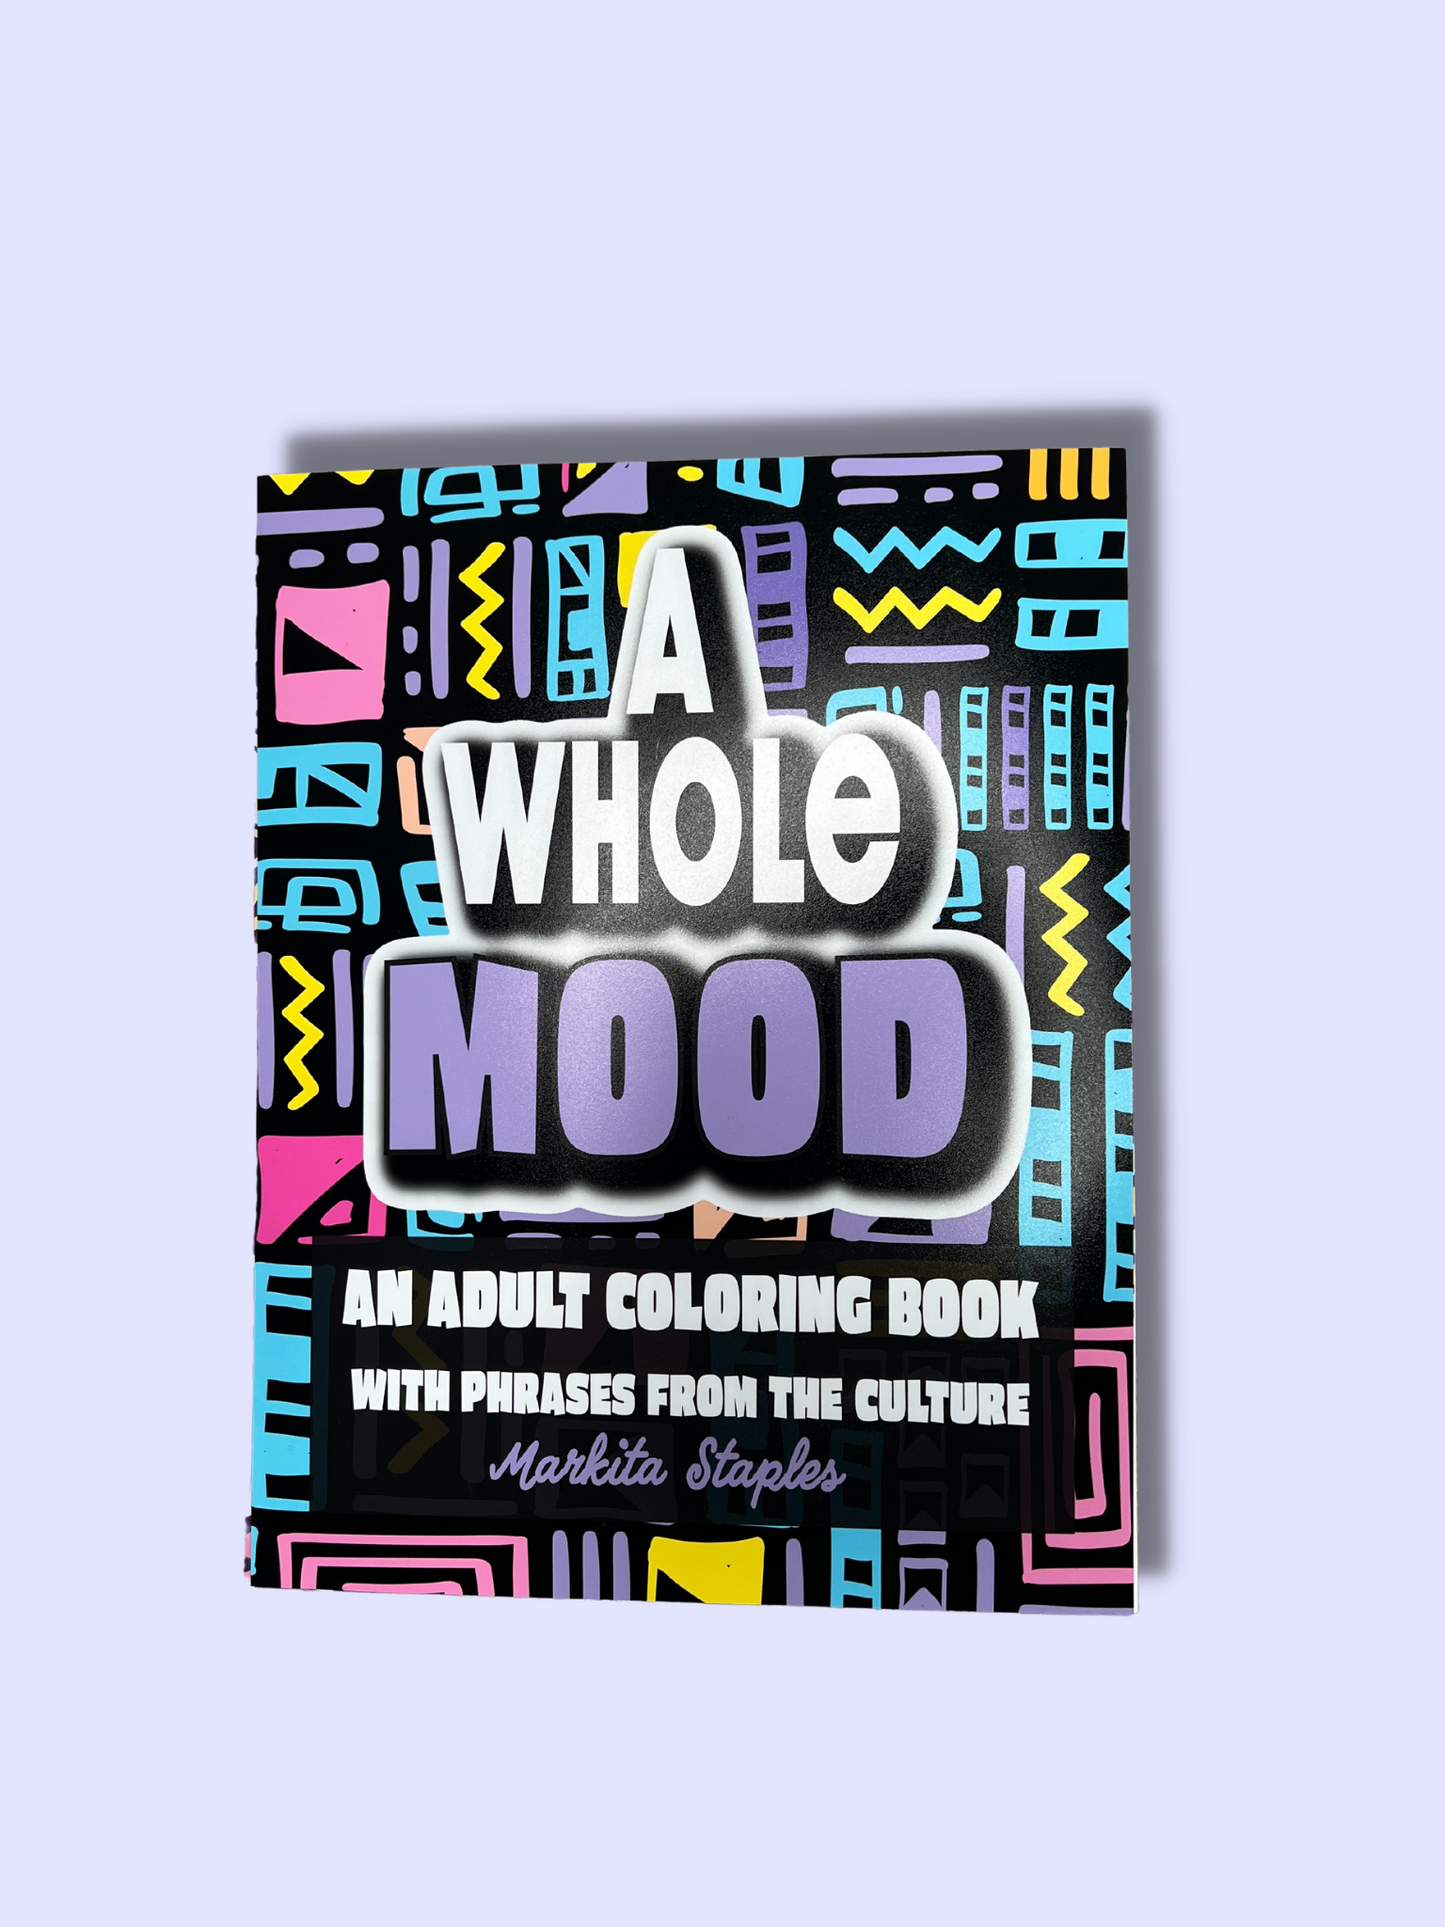 A Whole Mood: An Adult Coloring Book with Phrases from the Culture